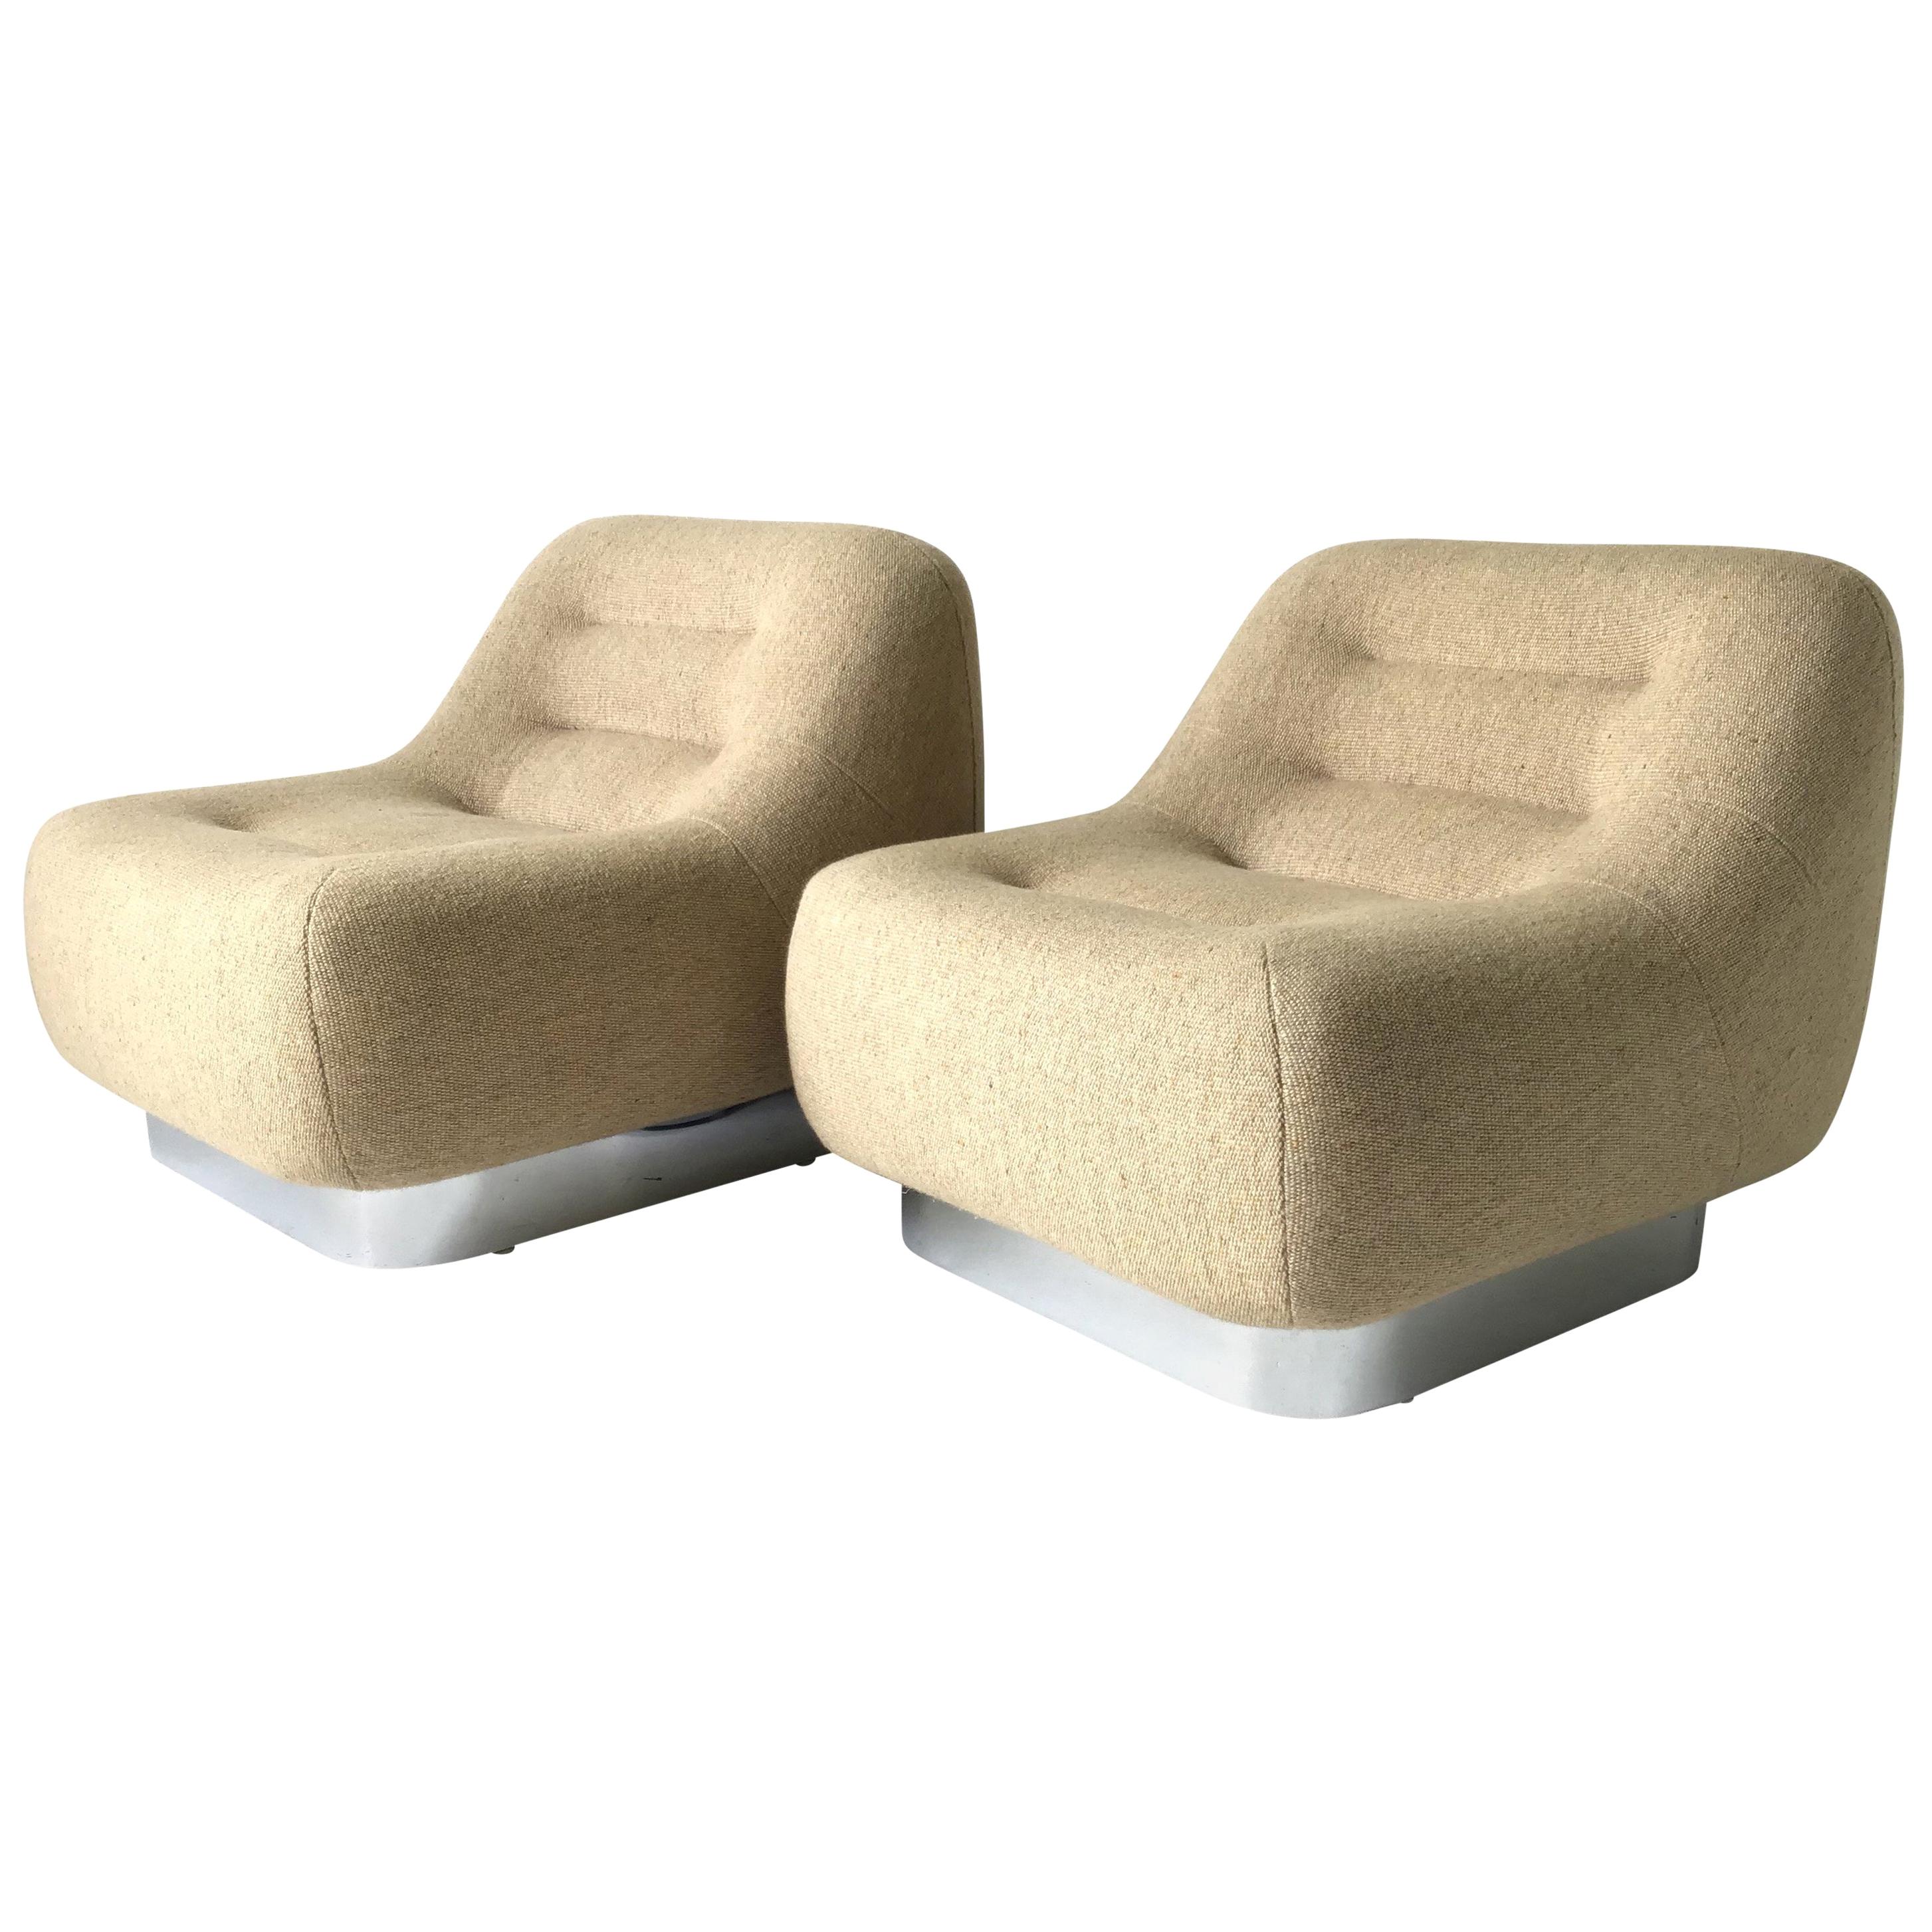 Pair of M.F. Harty Tomorrow Lounge Chairs for Stow Davis For Sale